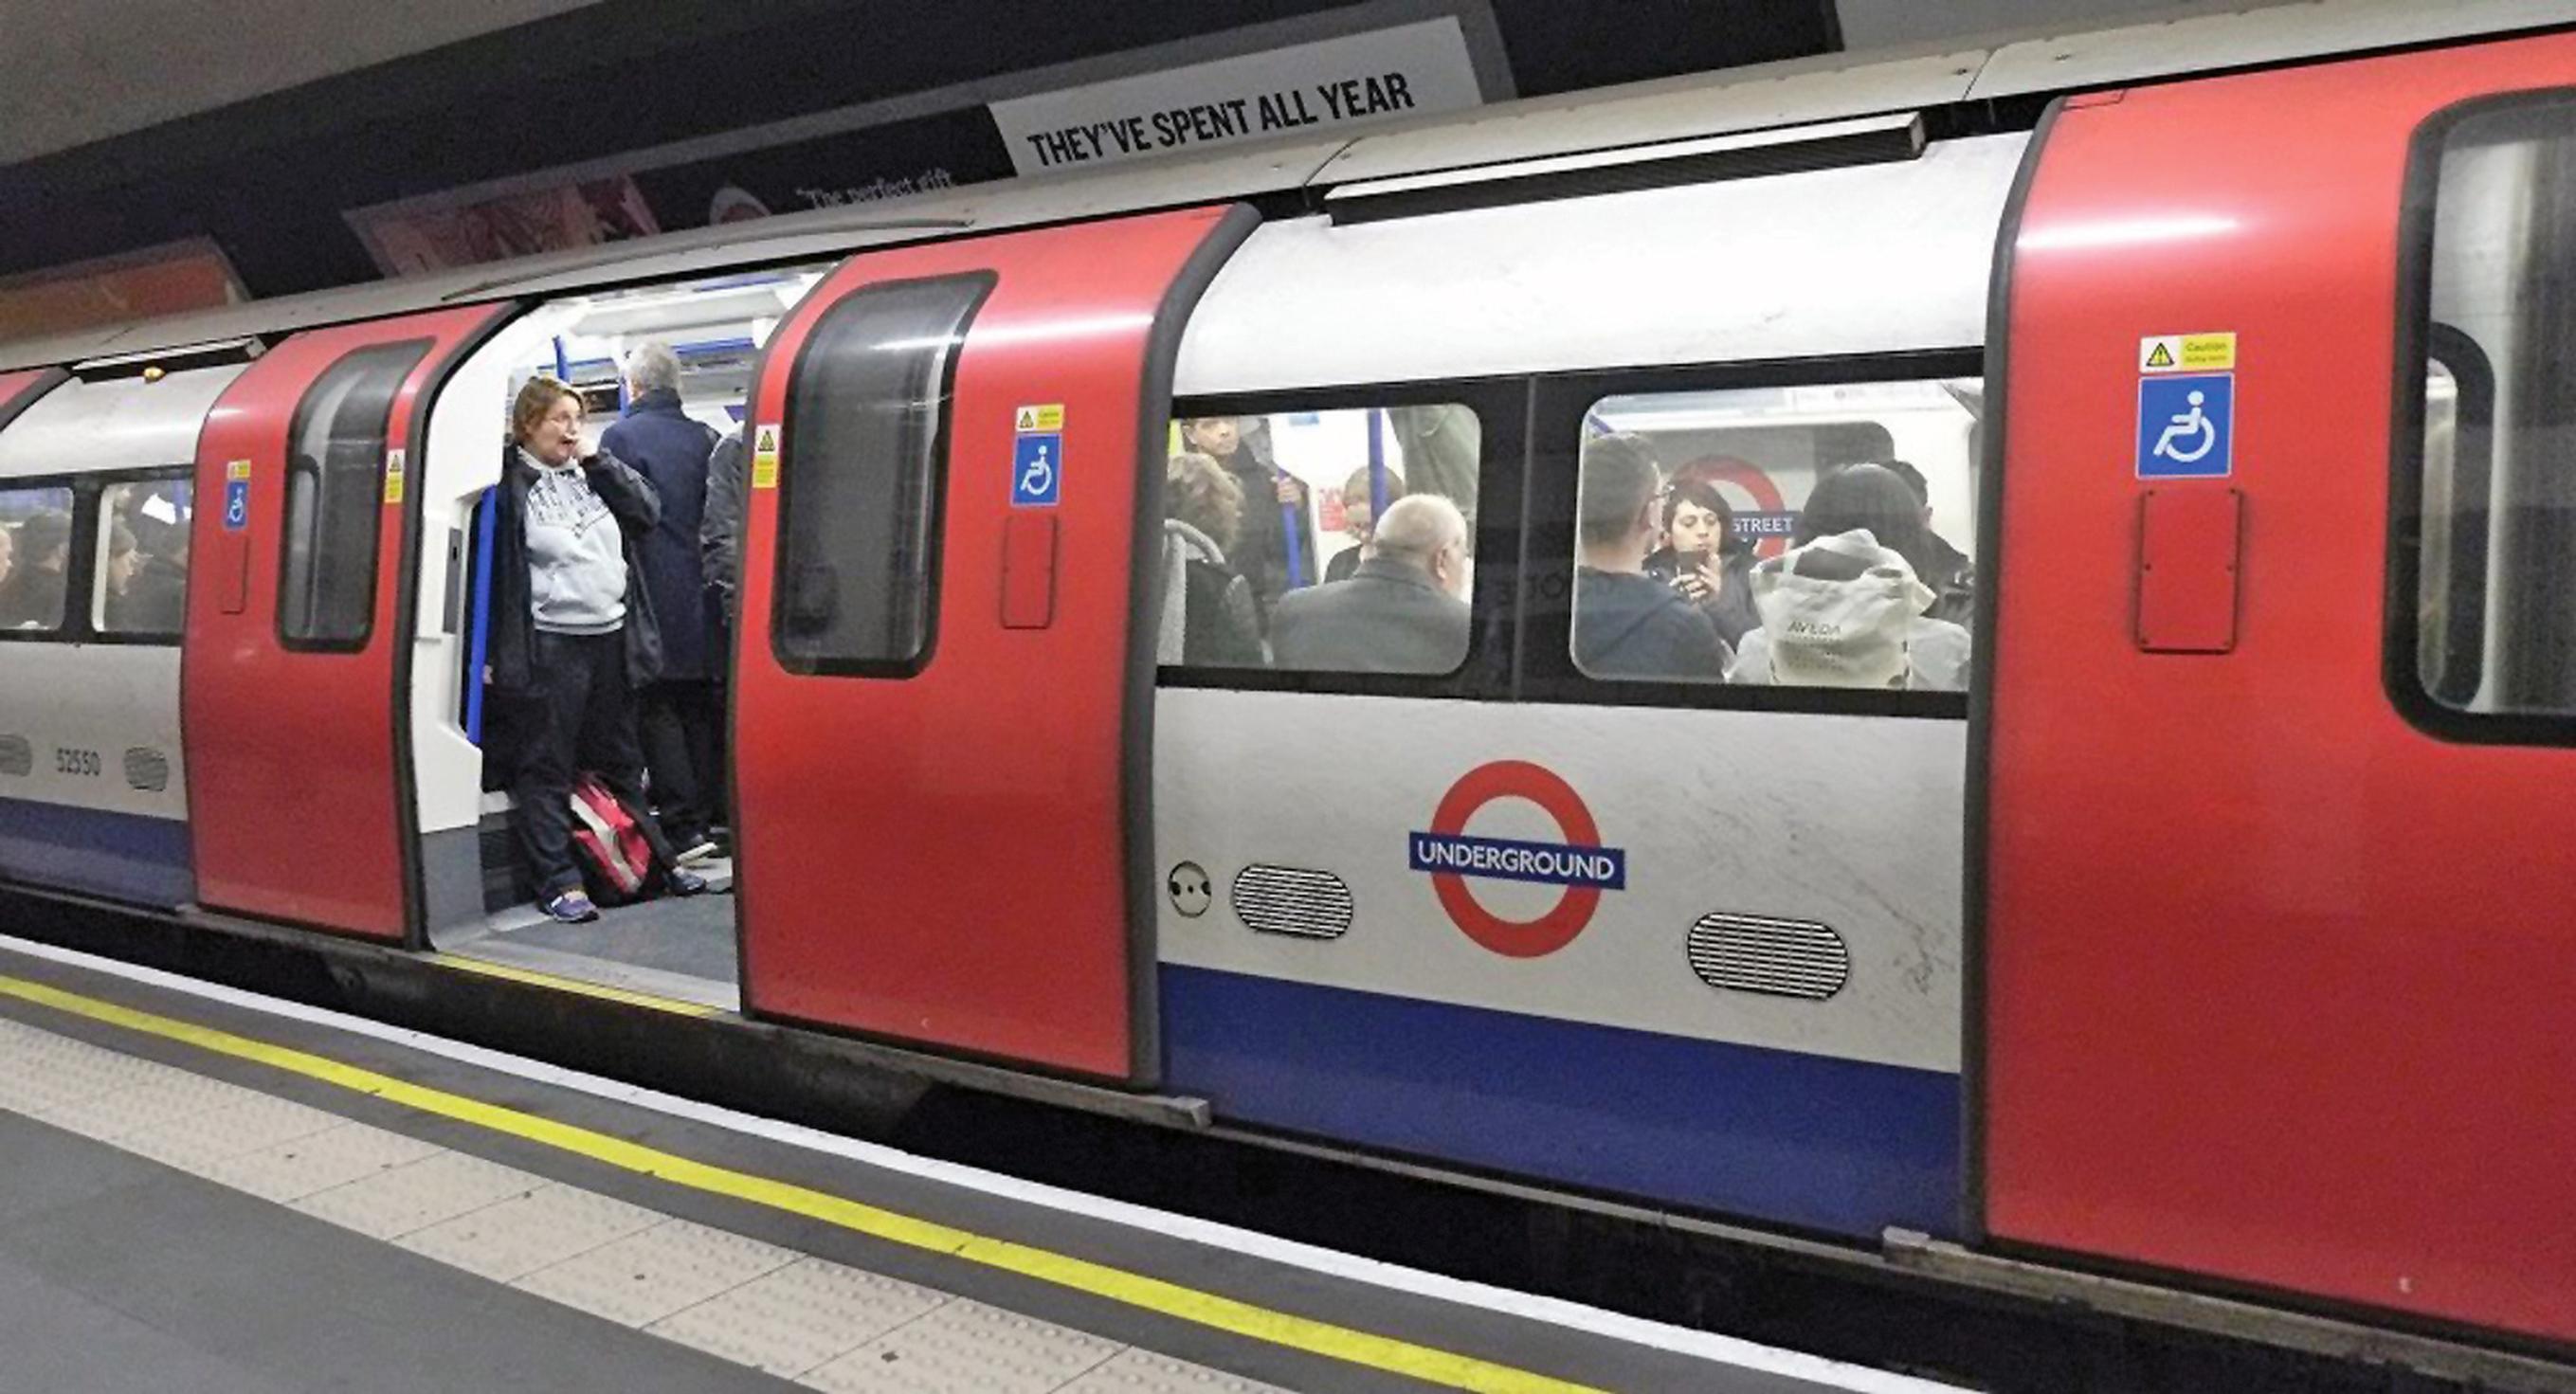 Passenger levels on the Tube were 69% for the week ending 3 April, but numbers were higher during the weekend